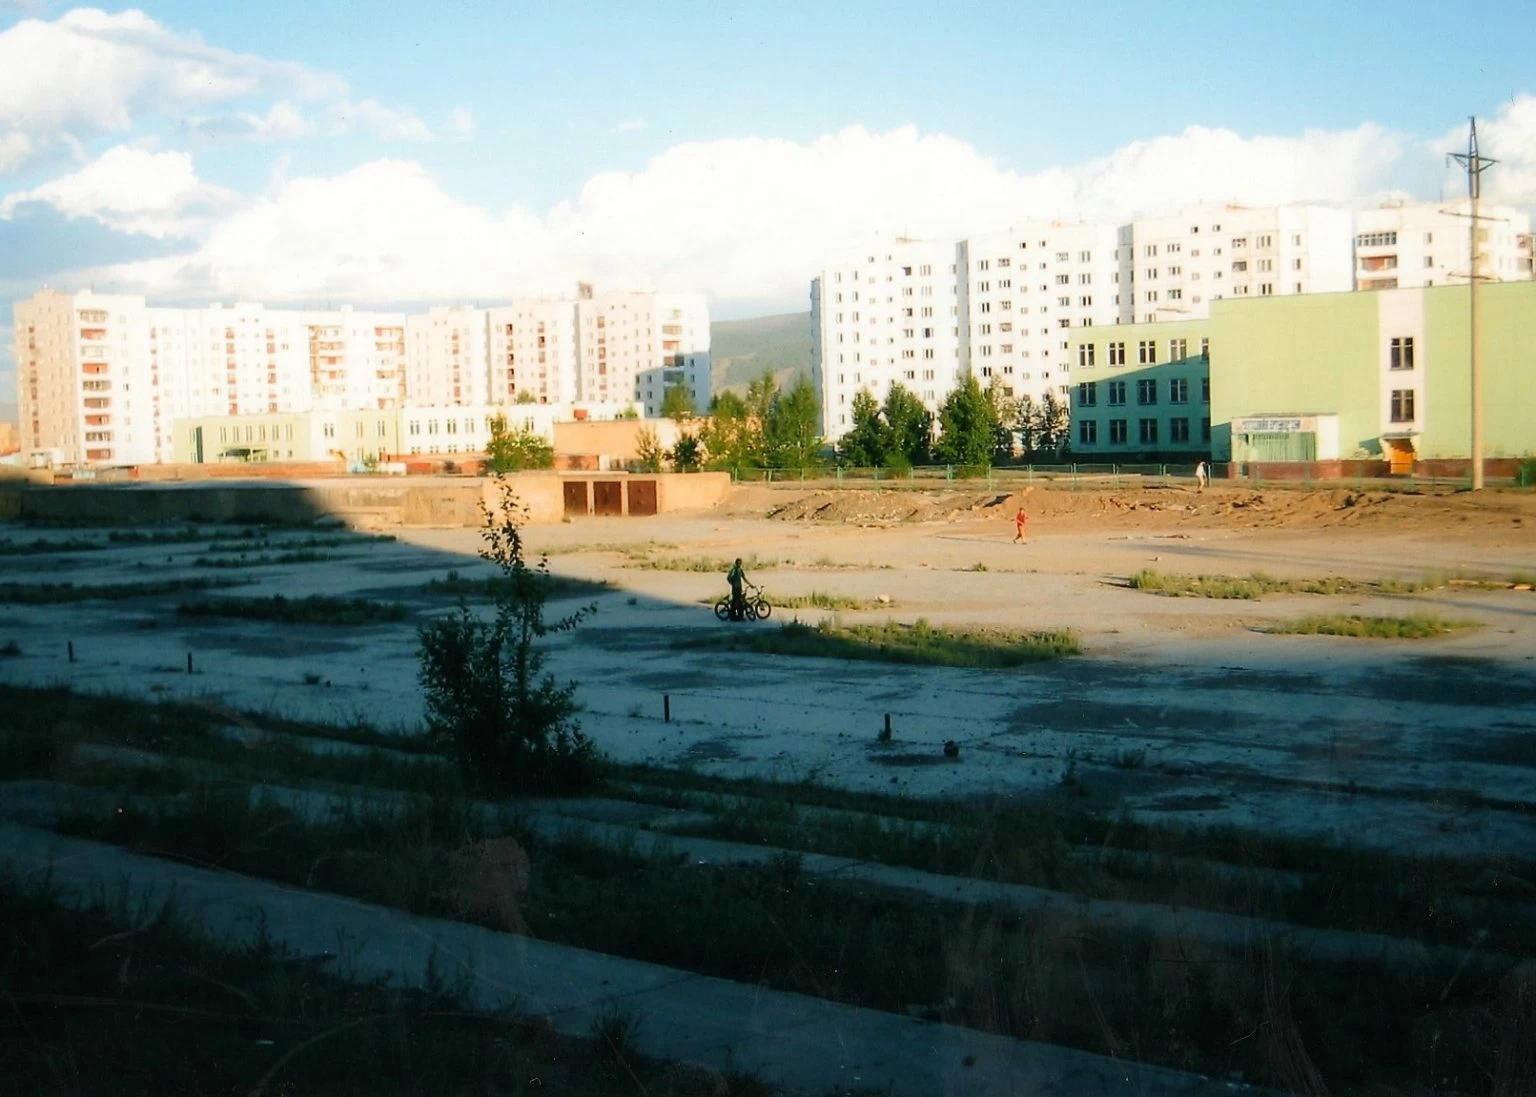 The abandoned skatepark as Andy and a fellow BMX rider found it when they finally arrived in the Mongolian capital, Ulan Bator.